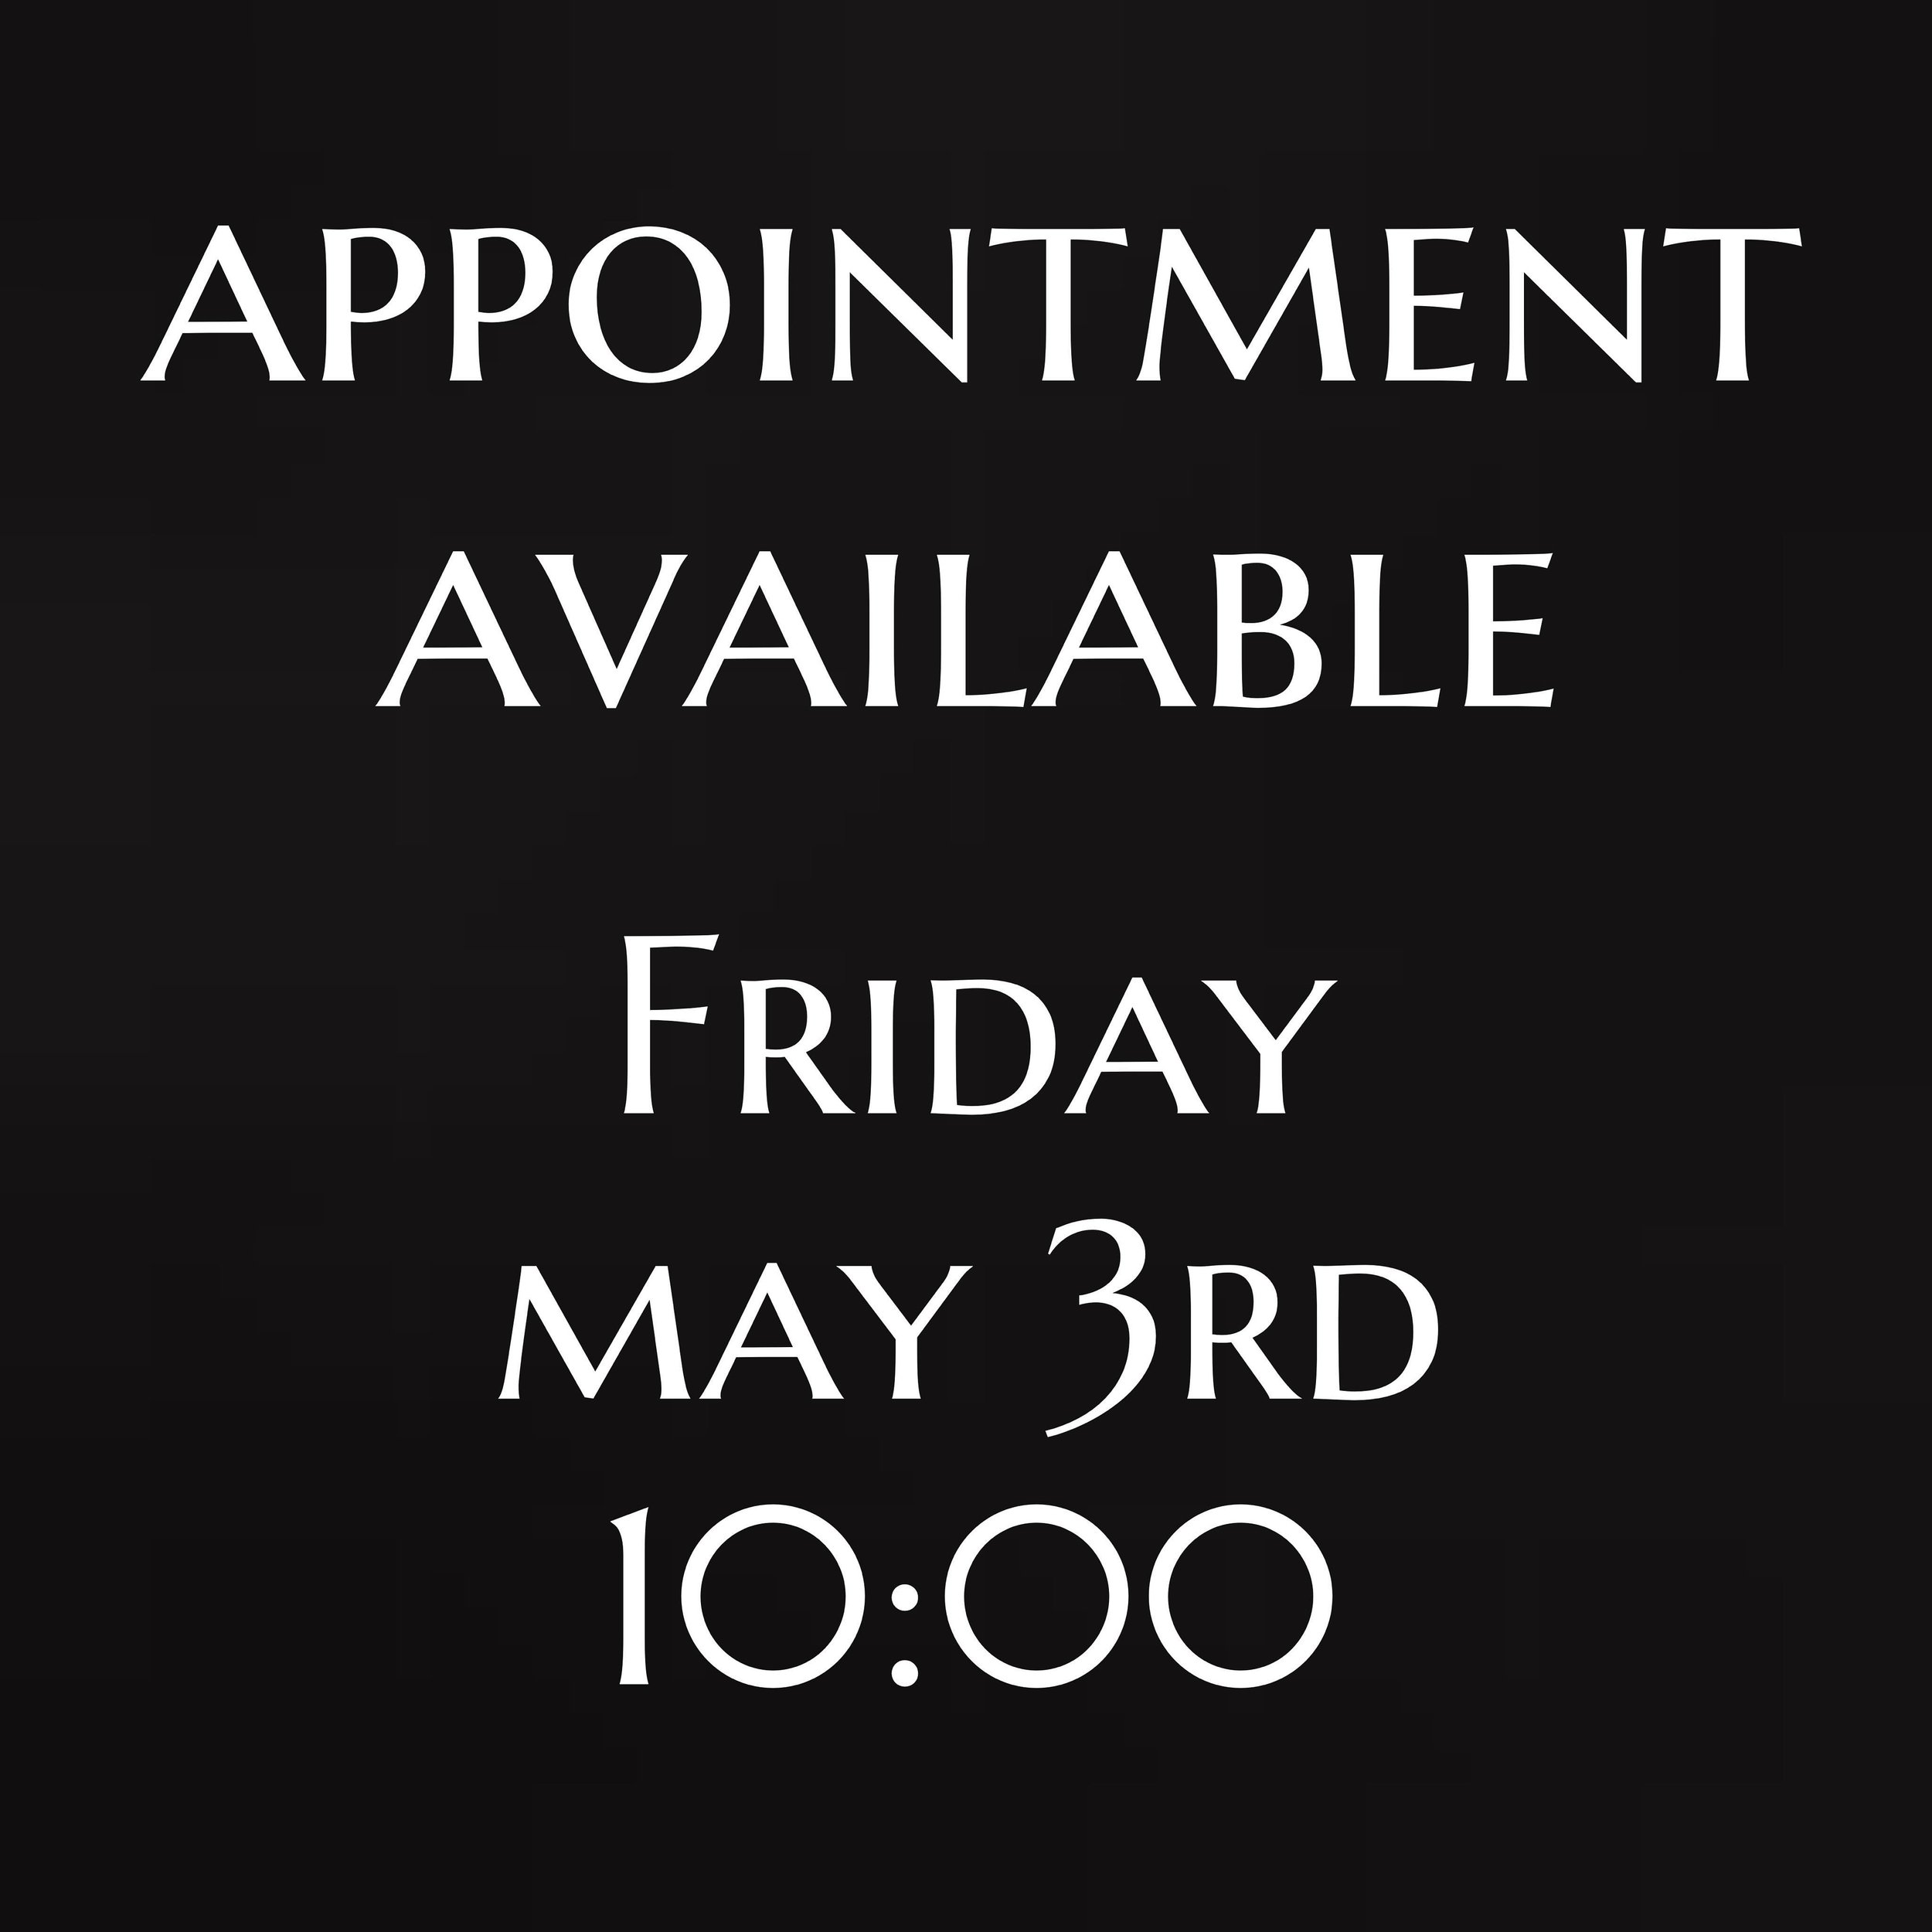 A spot has opened up on Friday May 3rd at 10:00. Ideal for a smaller piece (3 hours-ish). Email tattoos@cohenfloch.com or DM to reserve this appointment!
#yyjtattoo #victoriatattoo